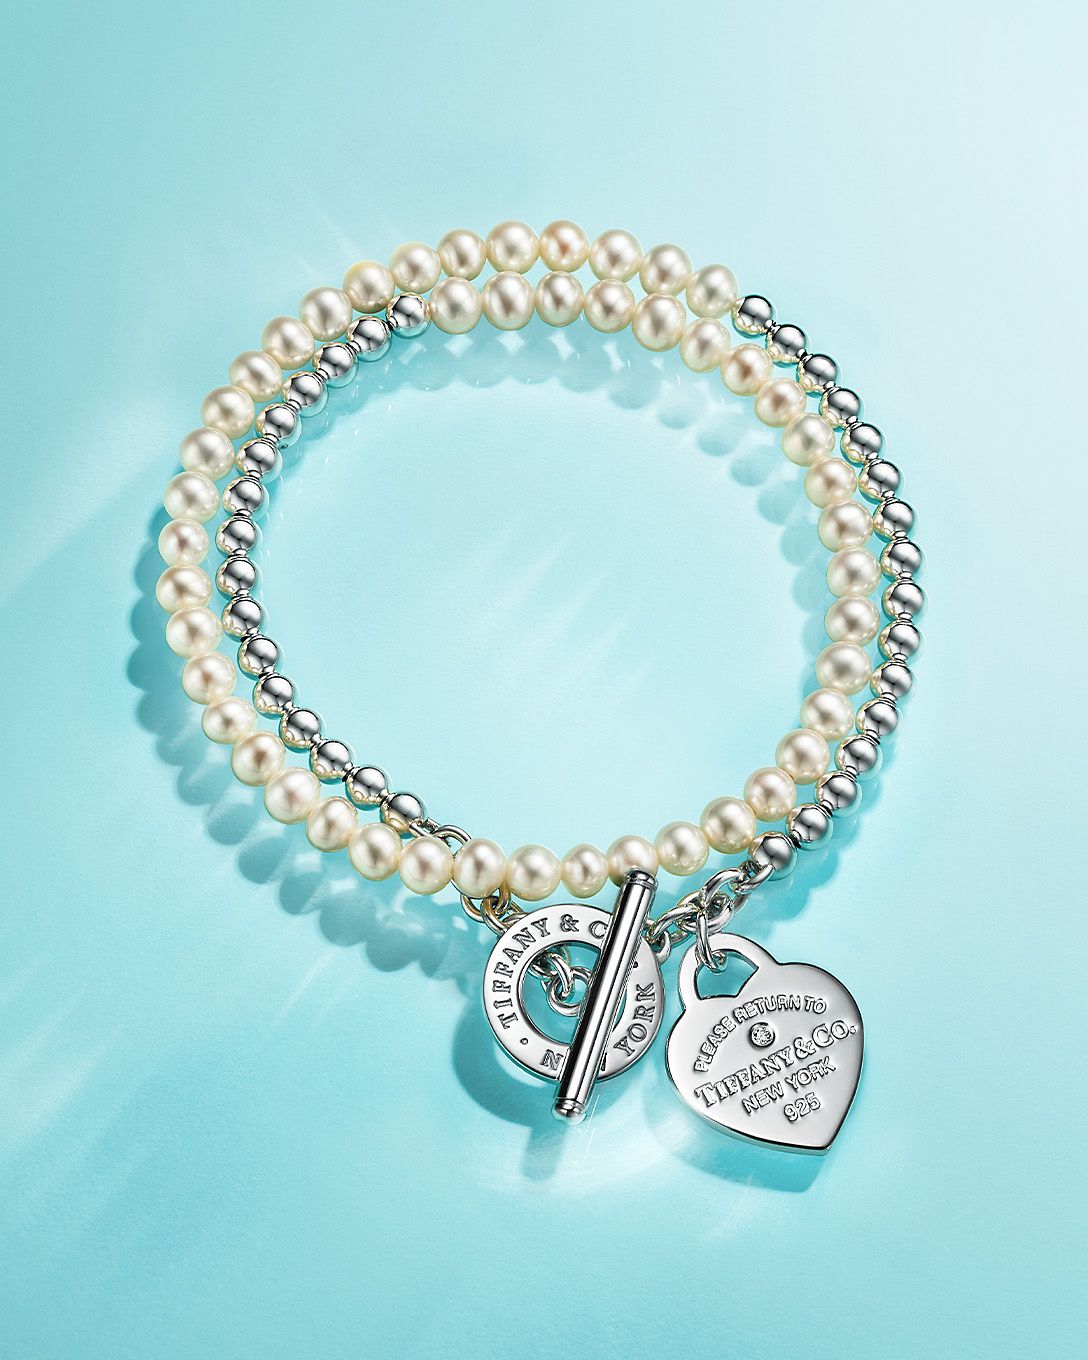 Shop Tiffany & Co. Gifts for Her